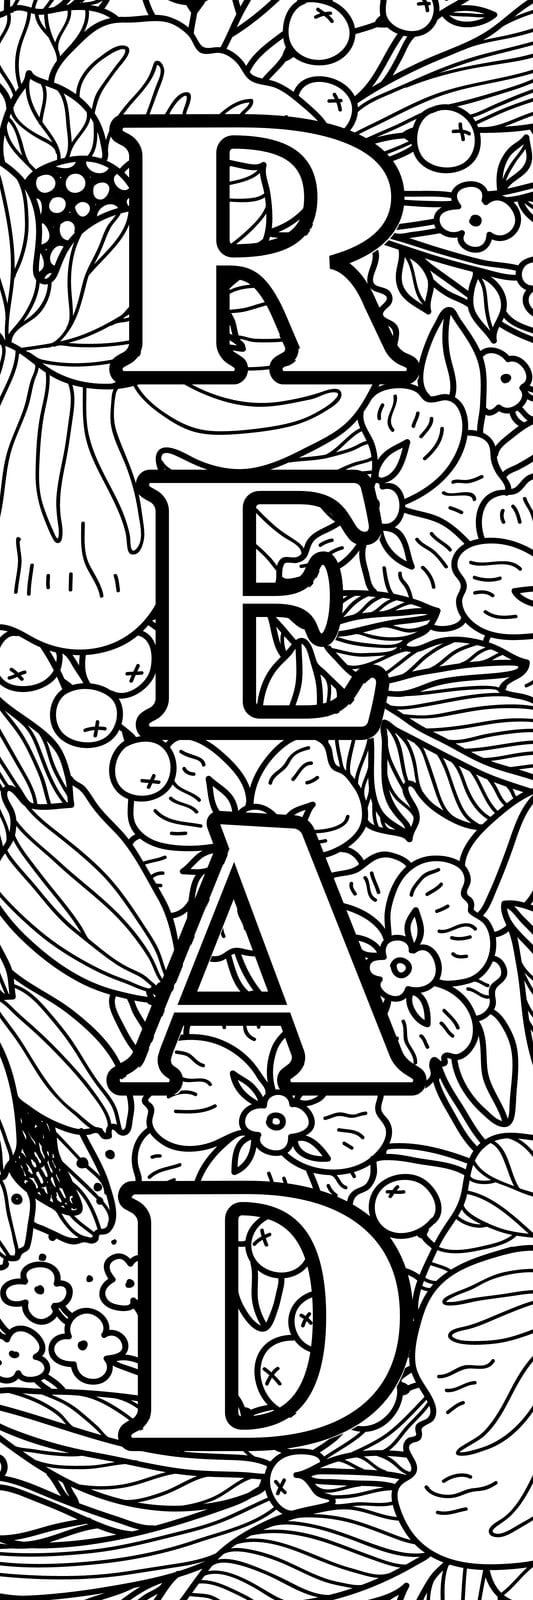 Flower Bookmark Coloring BooK: Bookmarks to Color and Share